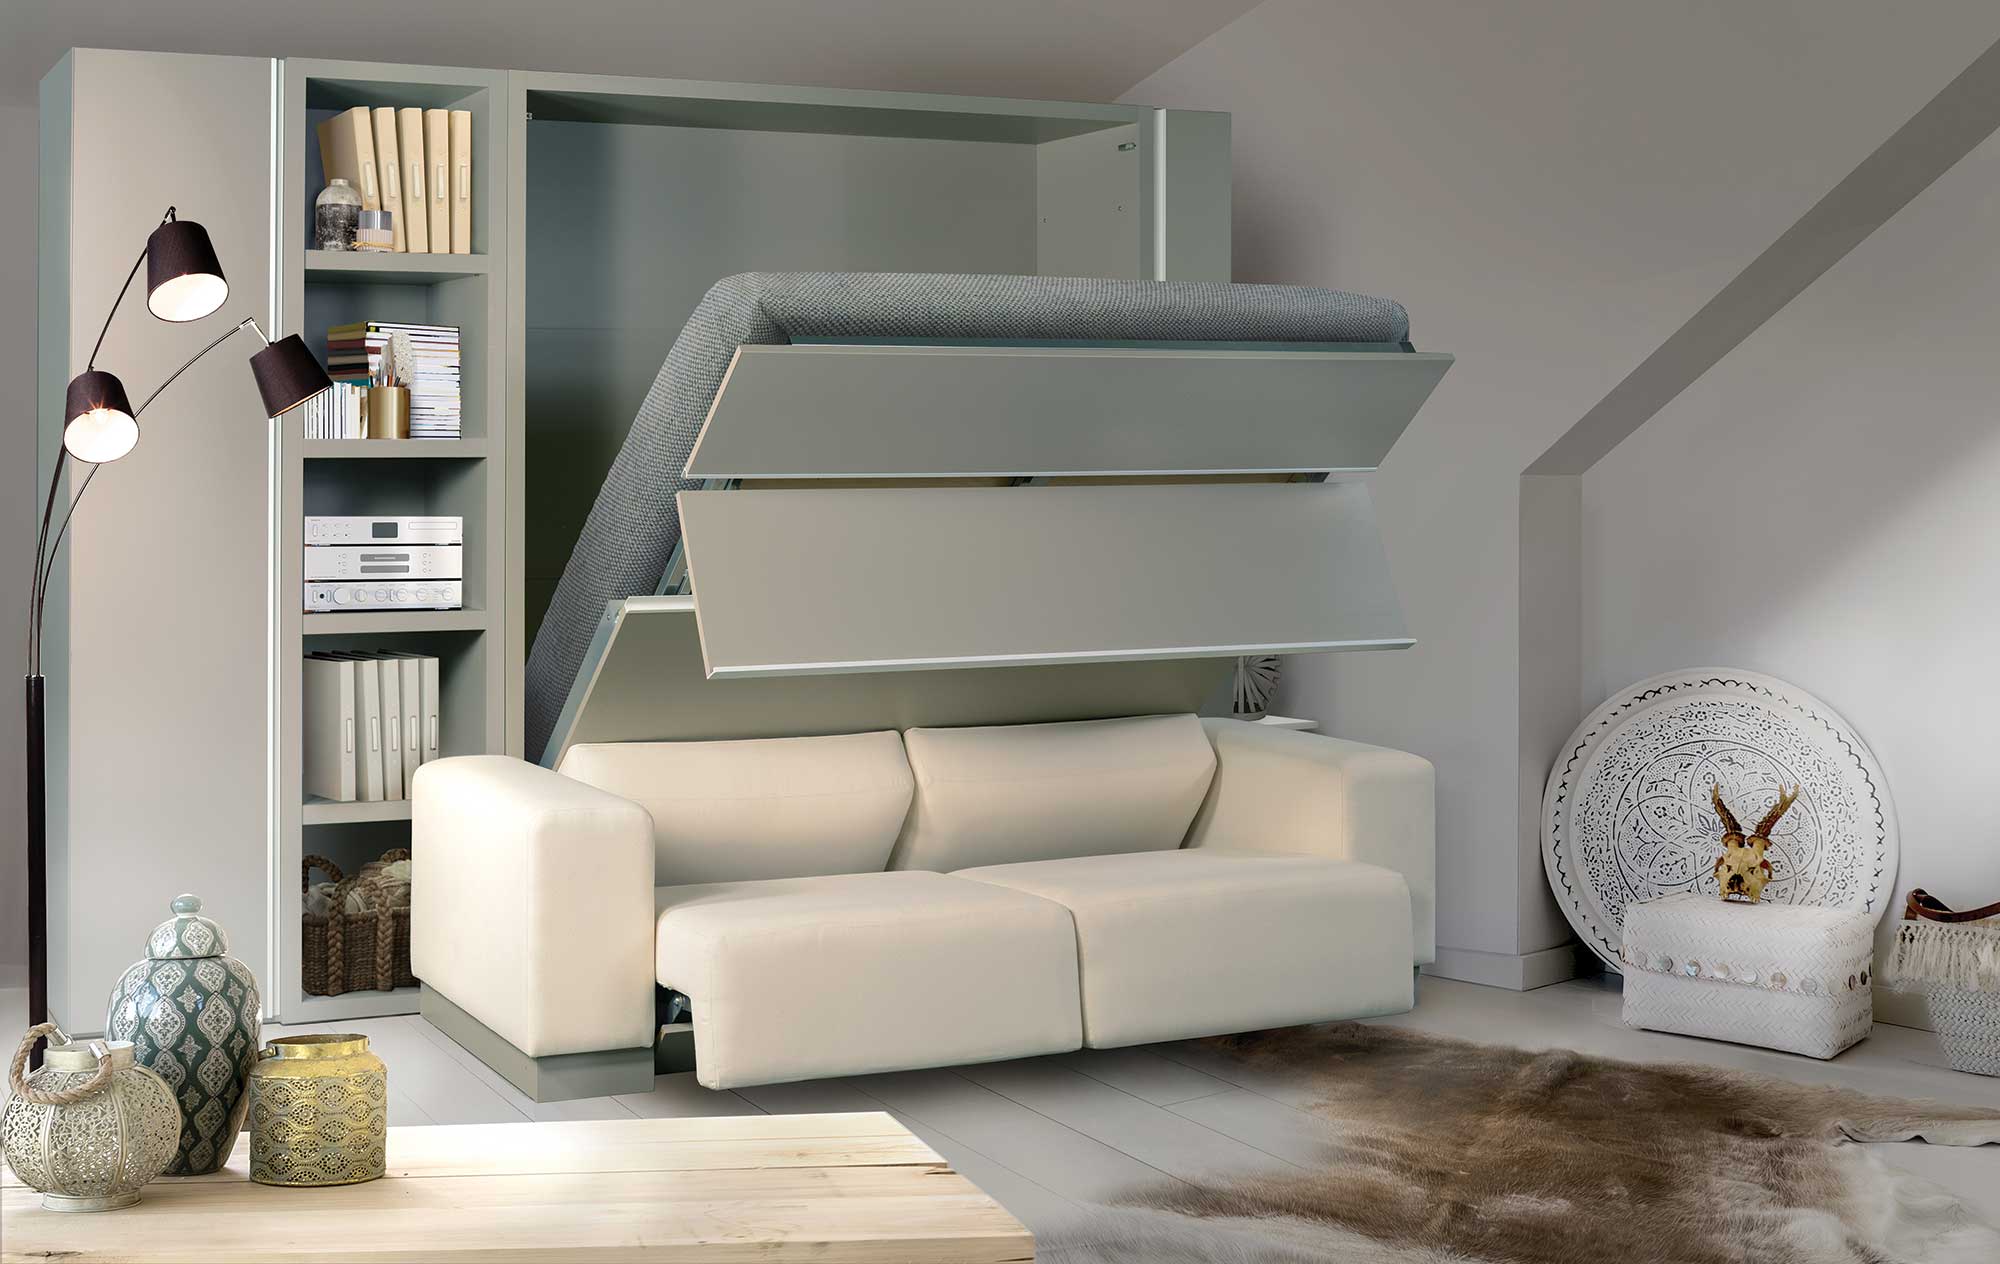 Comfort Sofa Wallbed The London, Murphy Bed And Comfortable Sofa In One